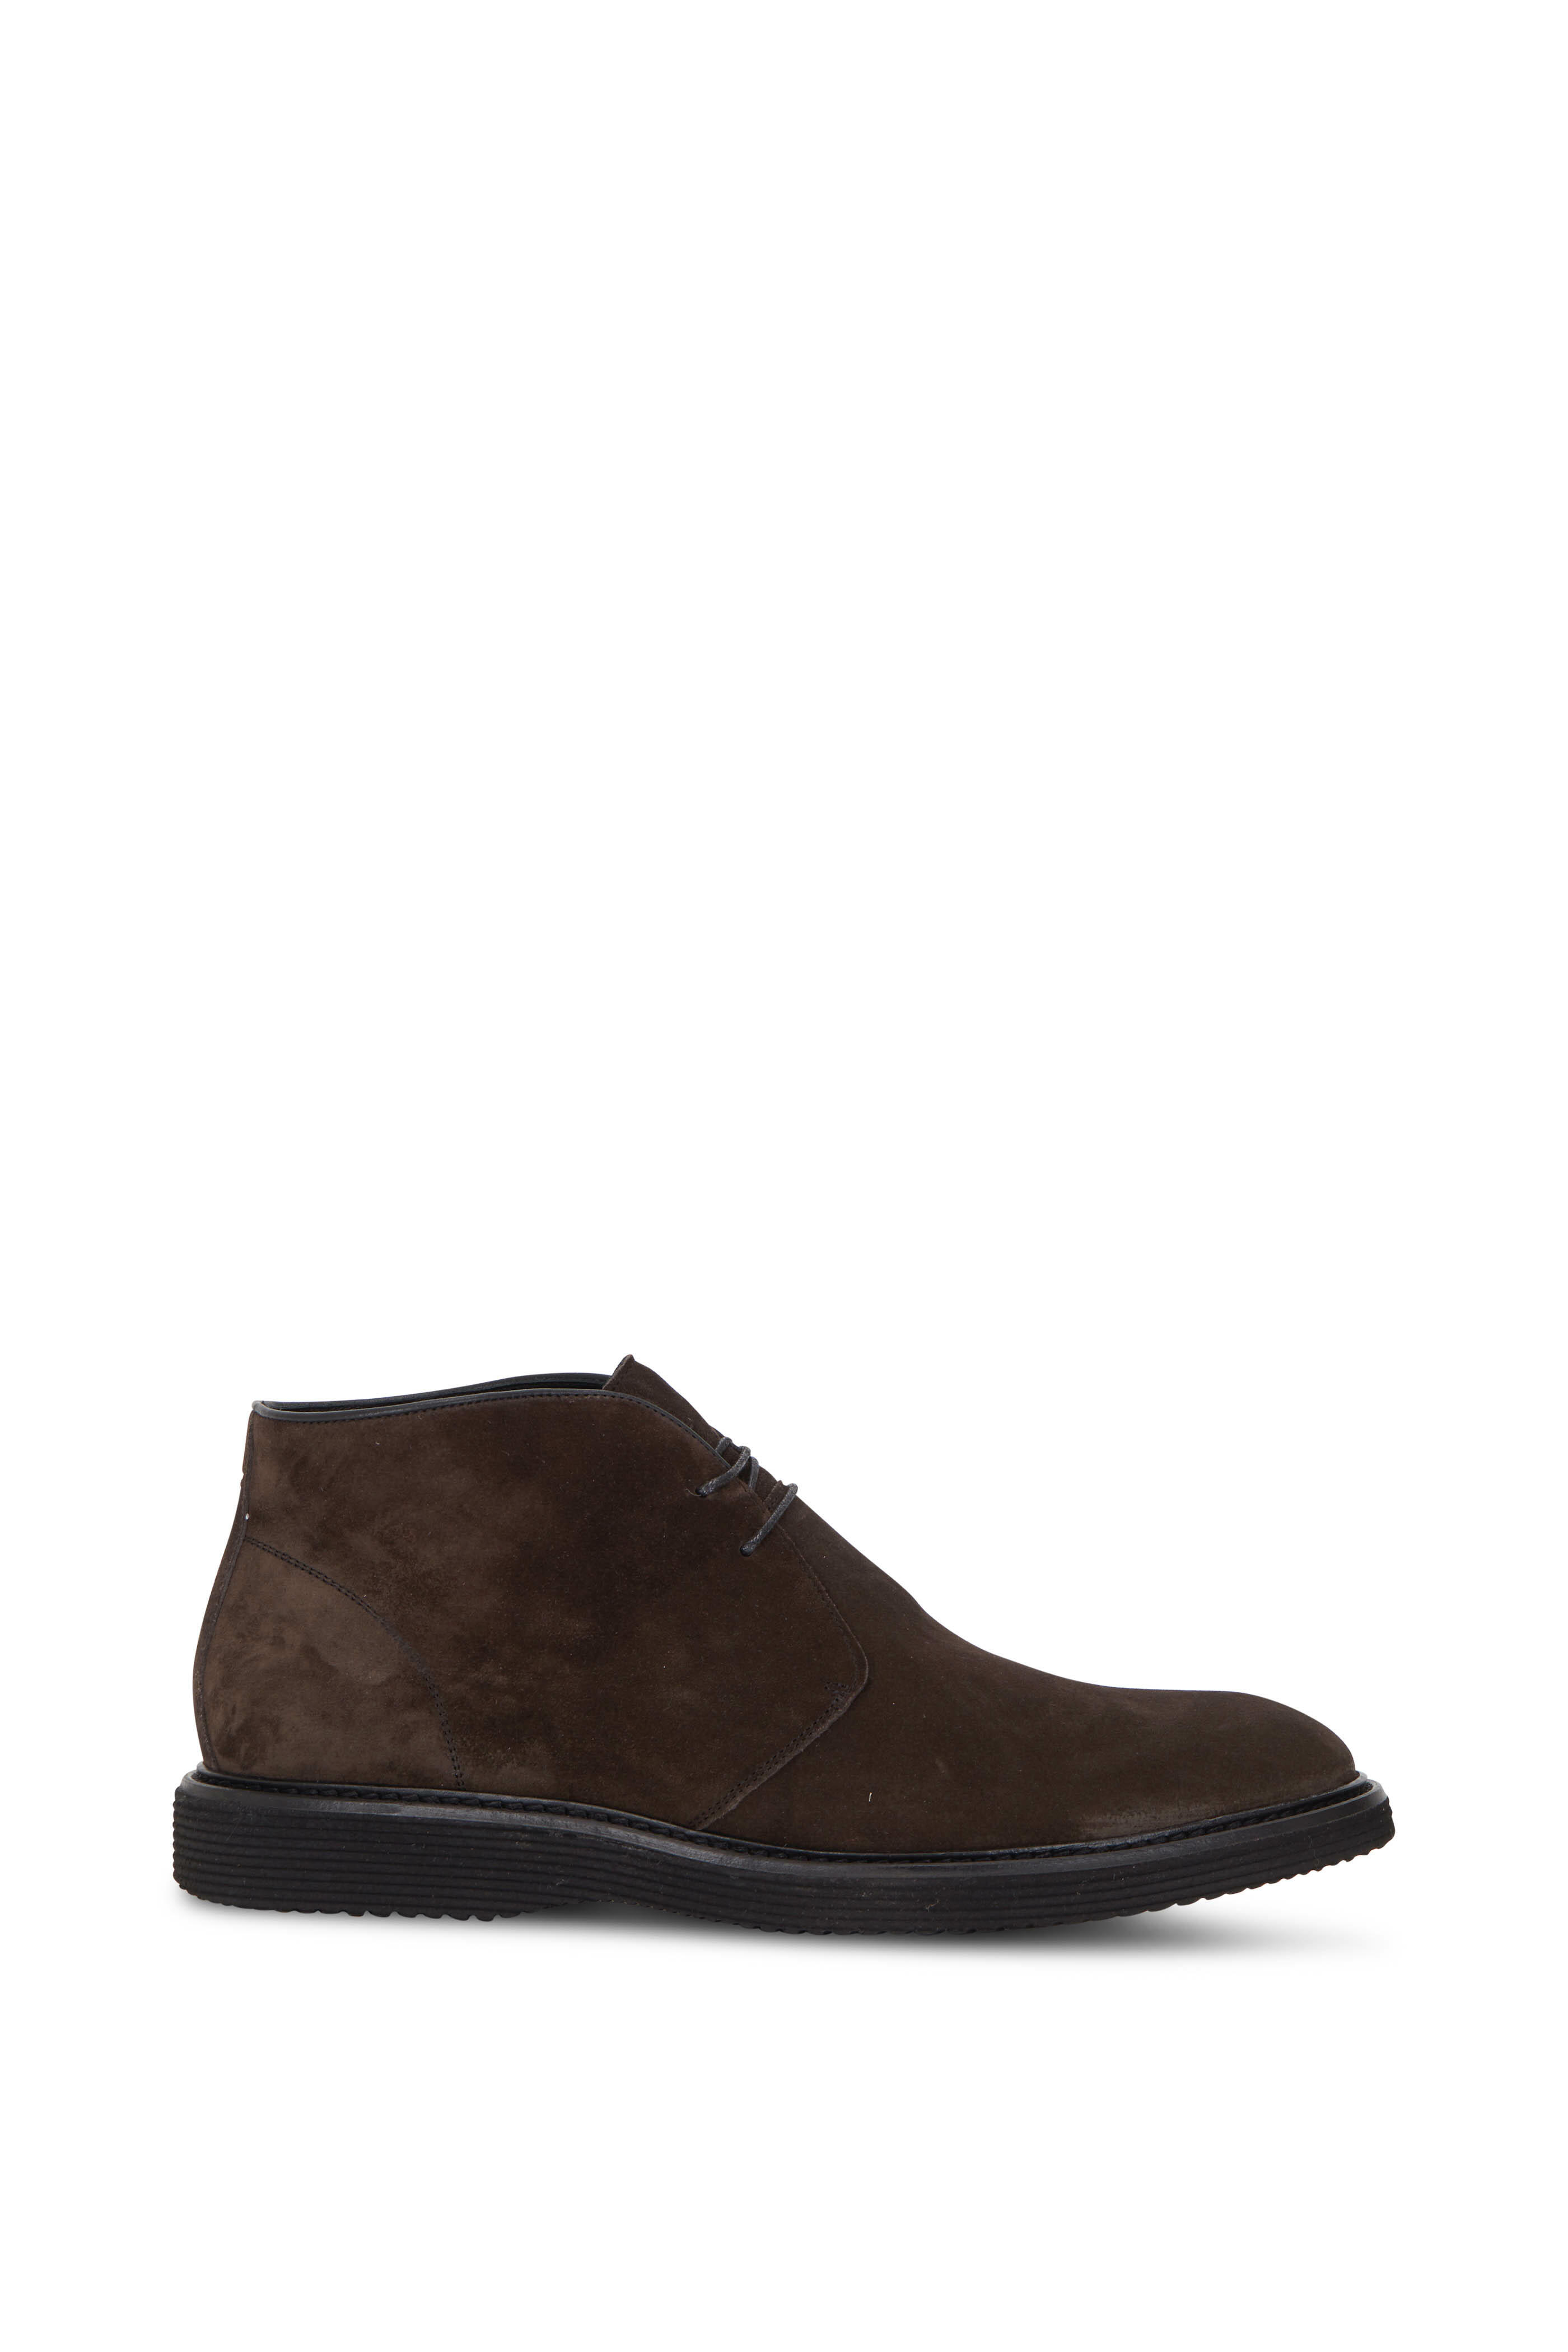 Kiton lace-up suede desert boots - Neutrals